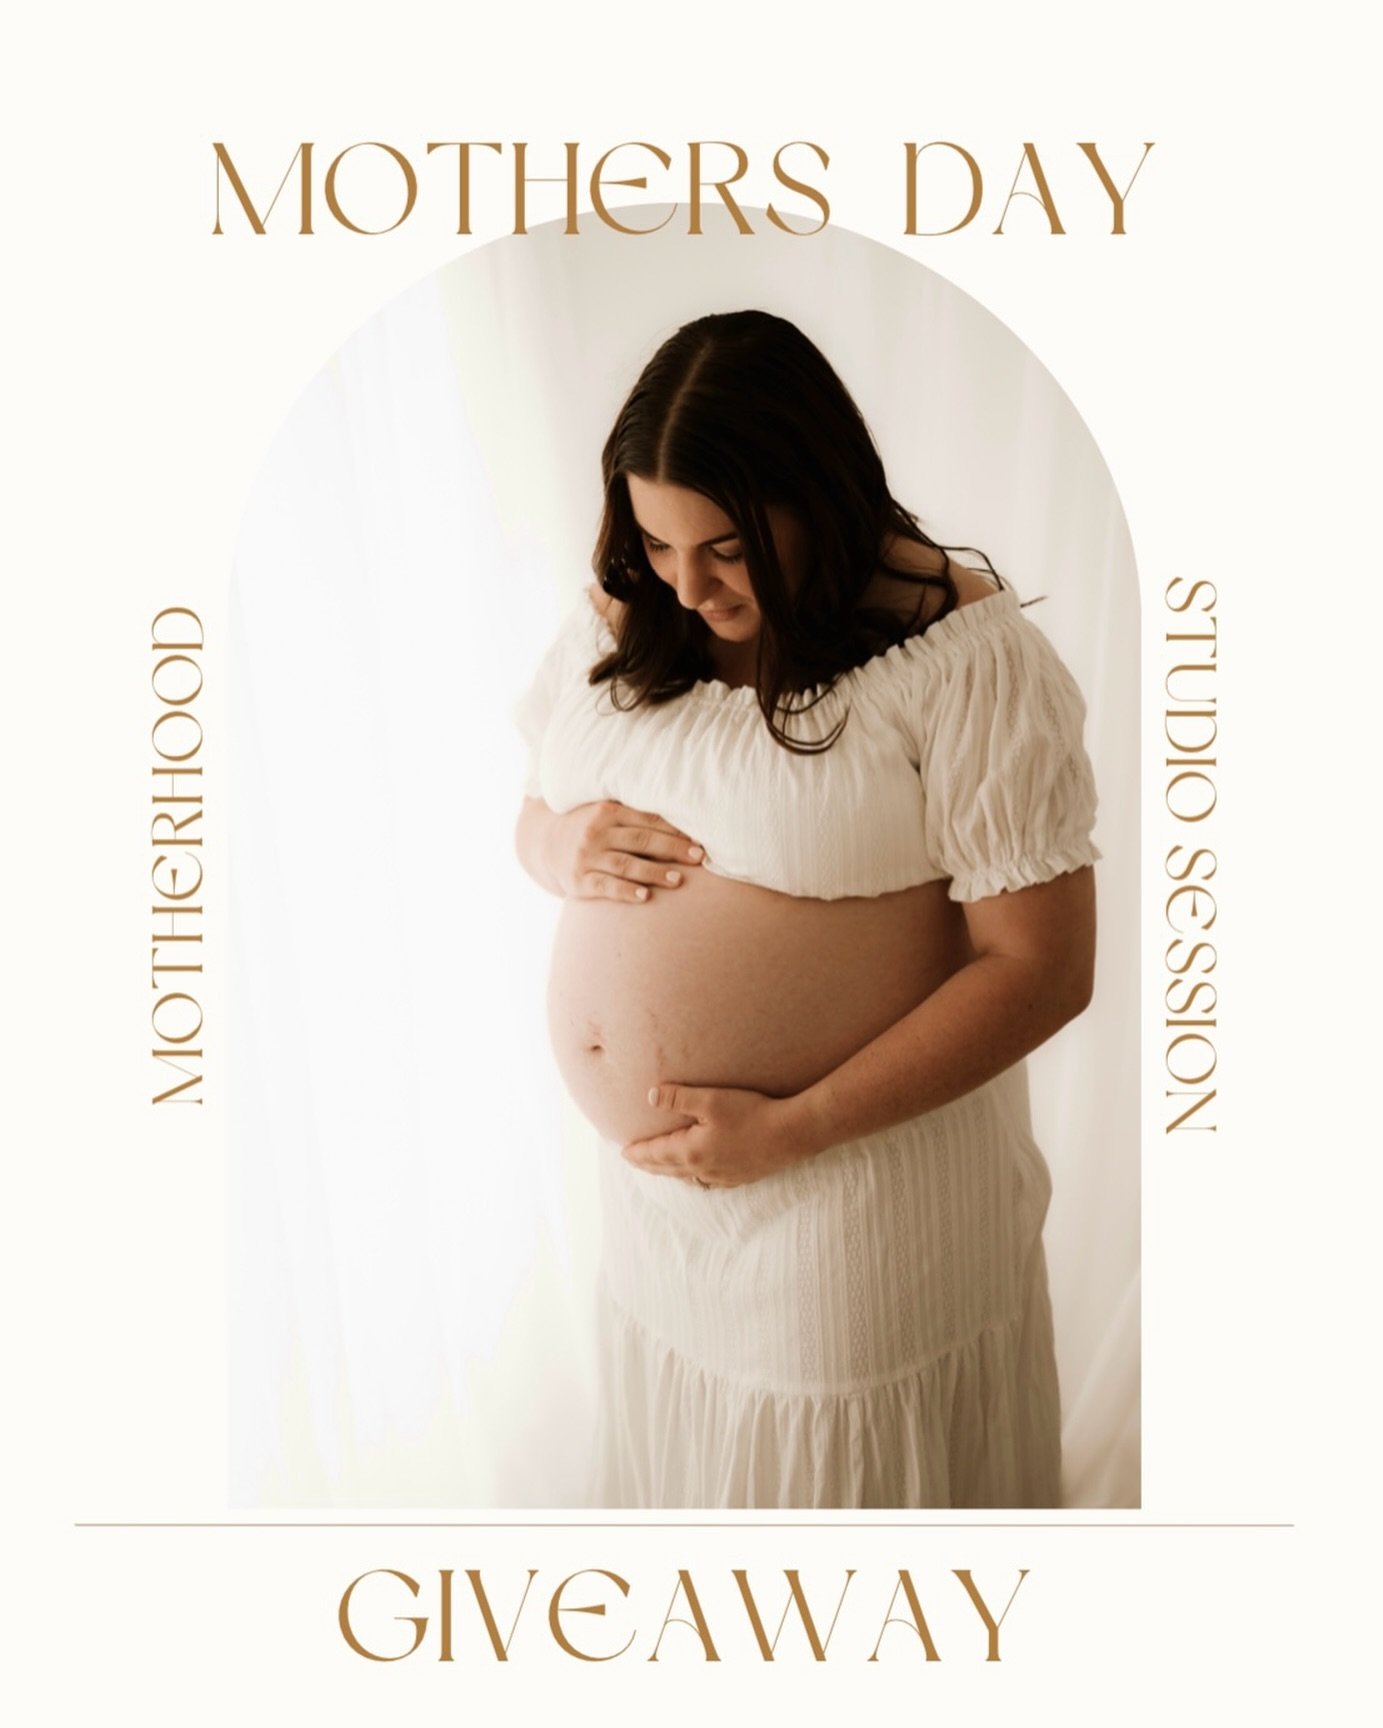 MOTHERS DAY GIVEAWAY 🌸

&ldquo;Motherhood: all love begins and ends there.&rdquo;~ Robert Browning
There is no one quite like mum, women give so much to motherhood, they are amazing and deserve to be celebrated. 
To celebrate, I will be giving away 